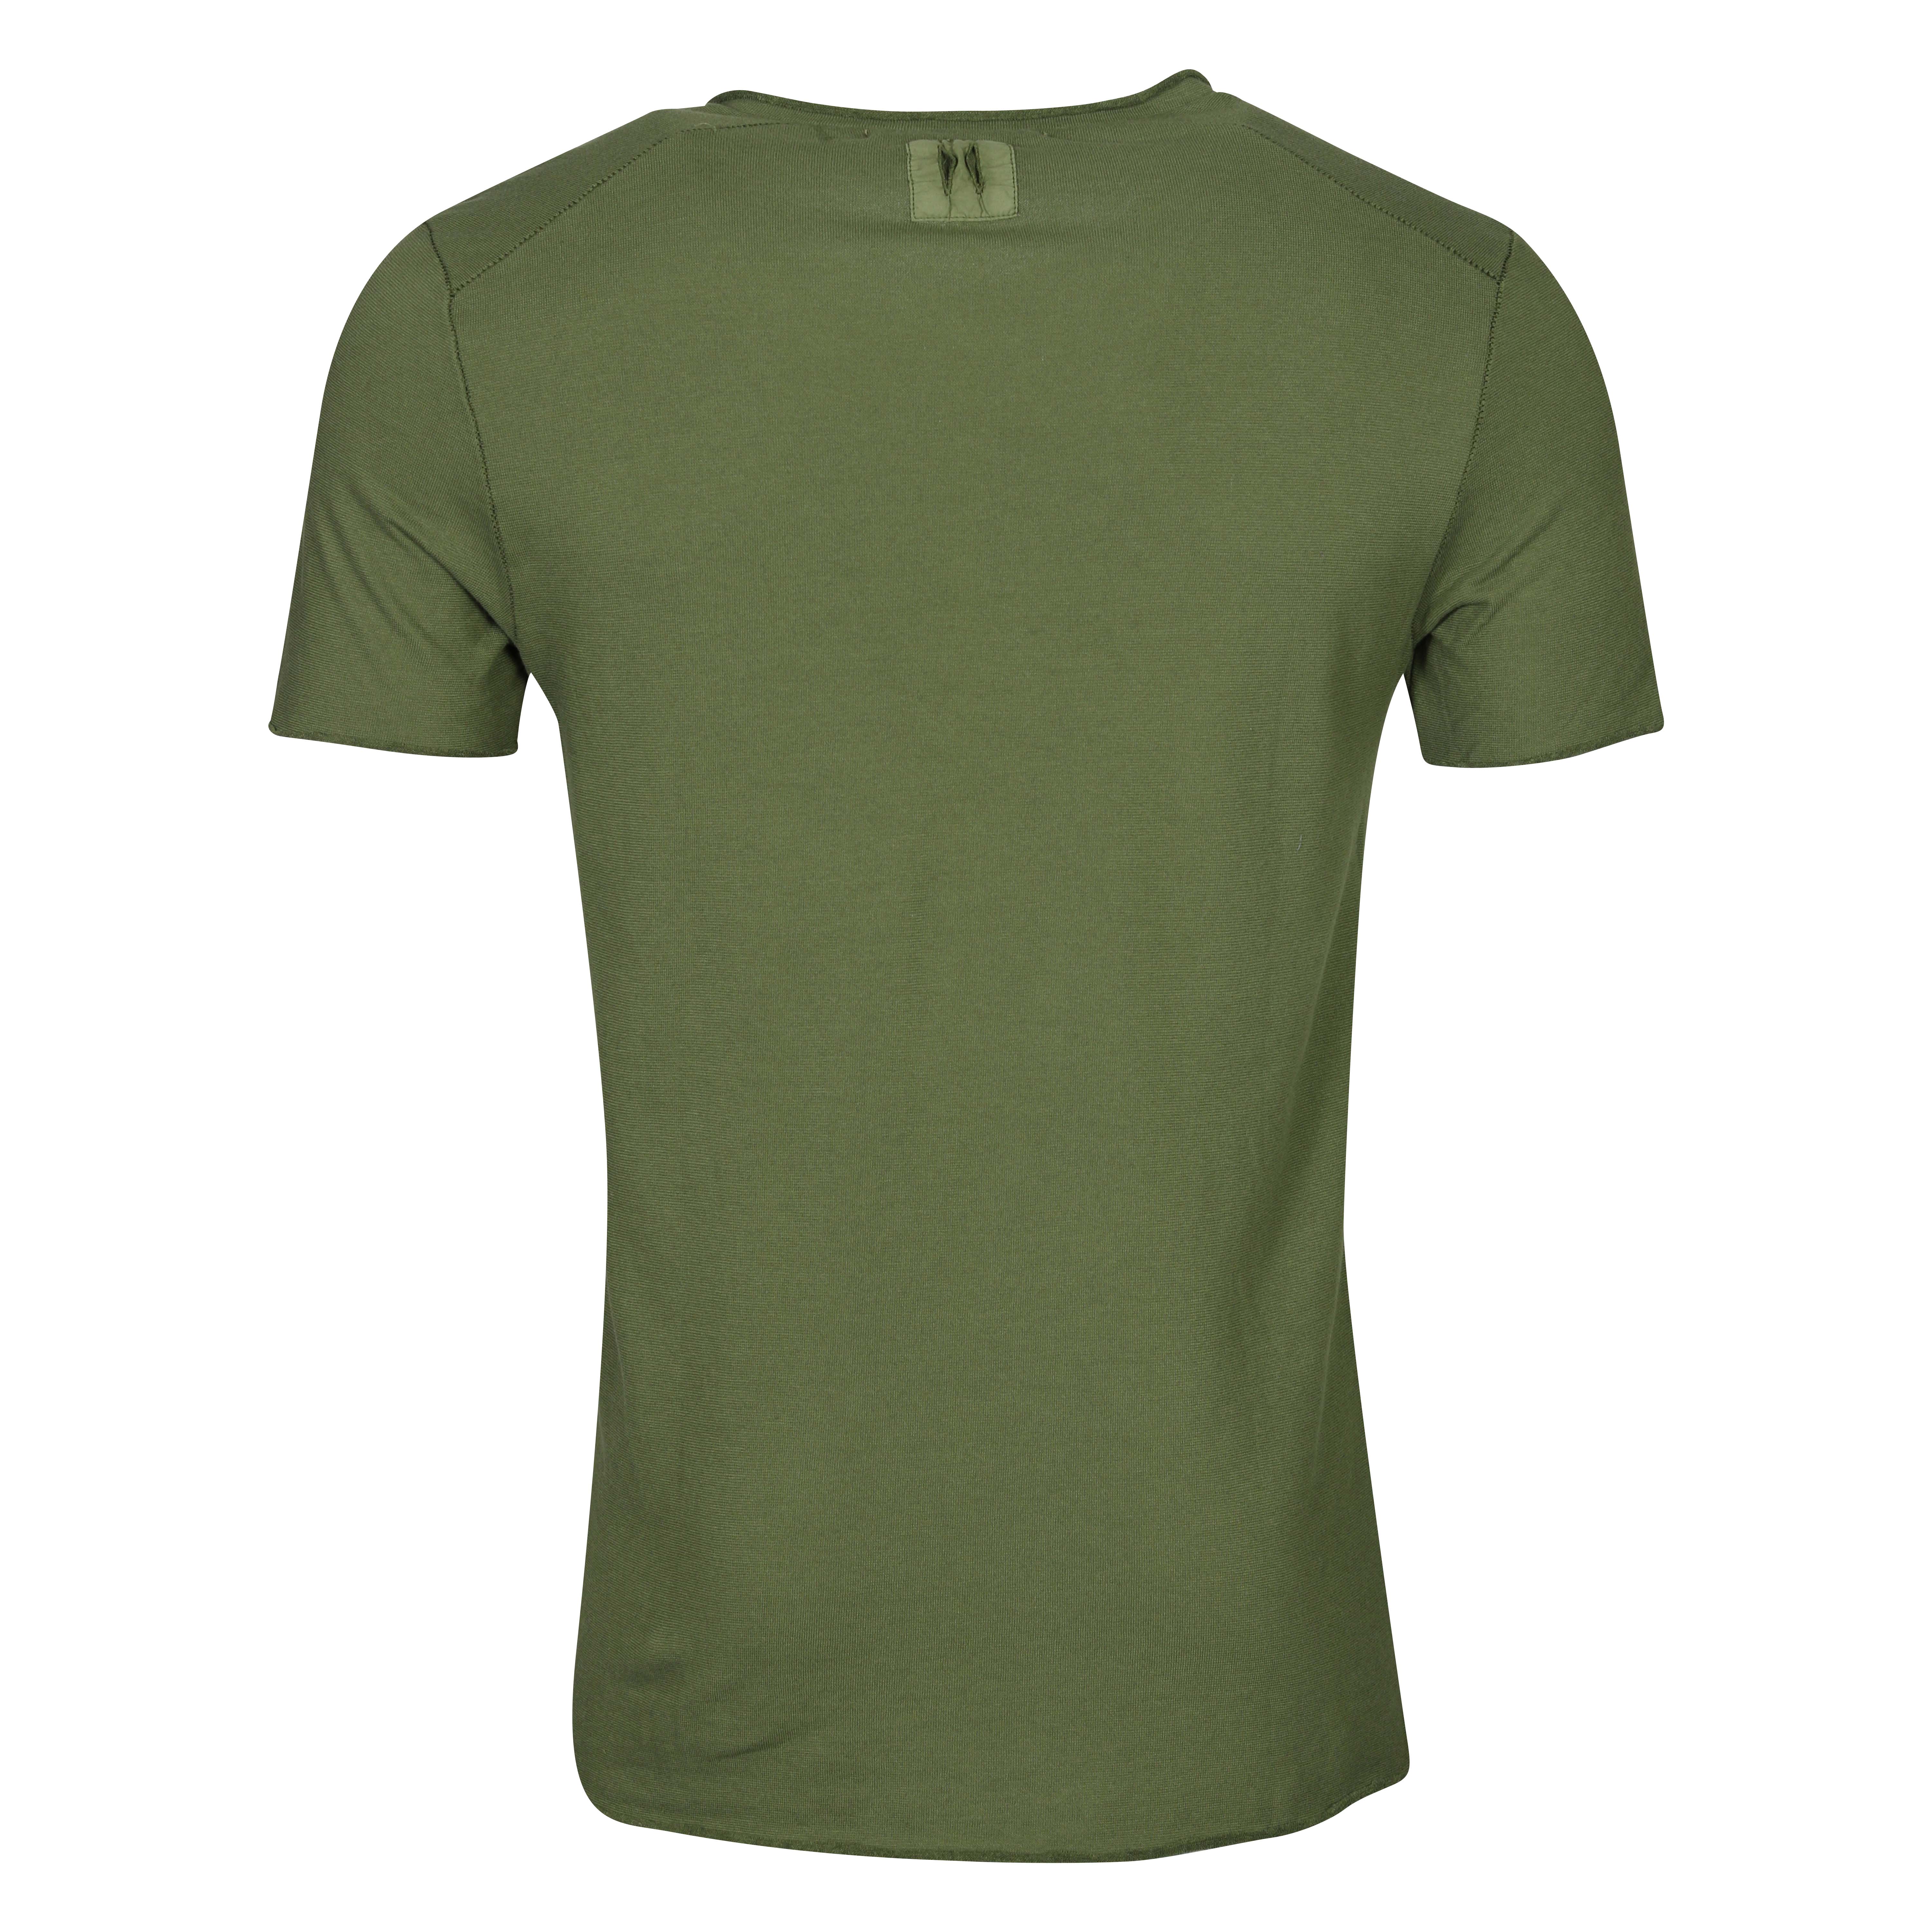 Hannes Roether Frottee V-Neck T-Shirt in Pesto